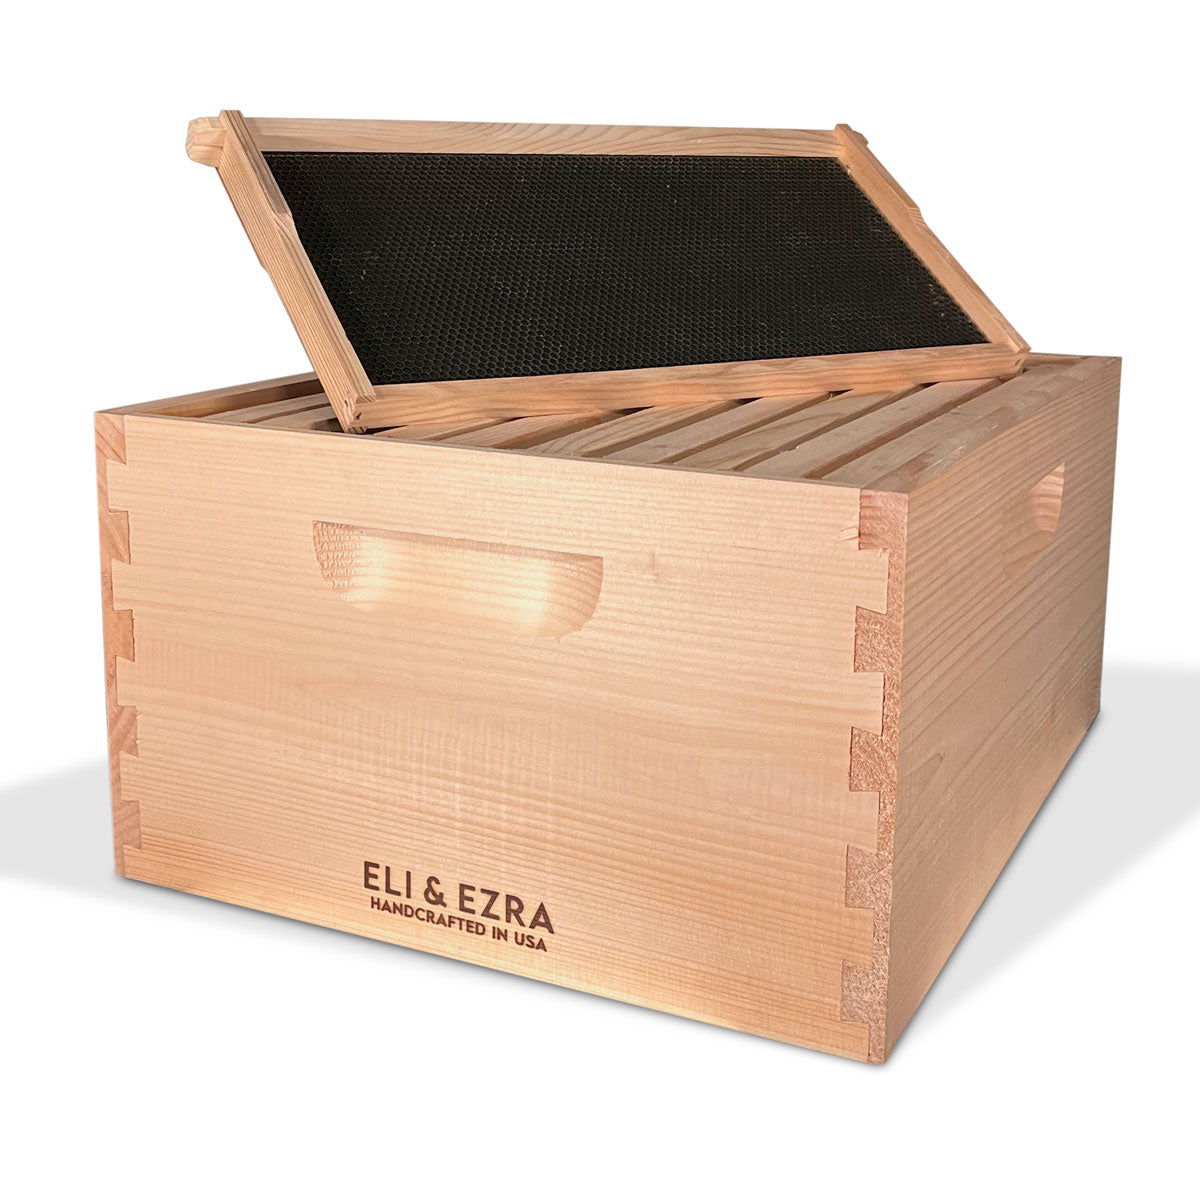 10 Frame Eli and Ezra Premium Amish-Made in USA Beehive Kit: 2 Deep + 1 Medium Boxes with Dovetail Joints